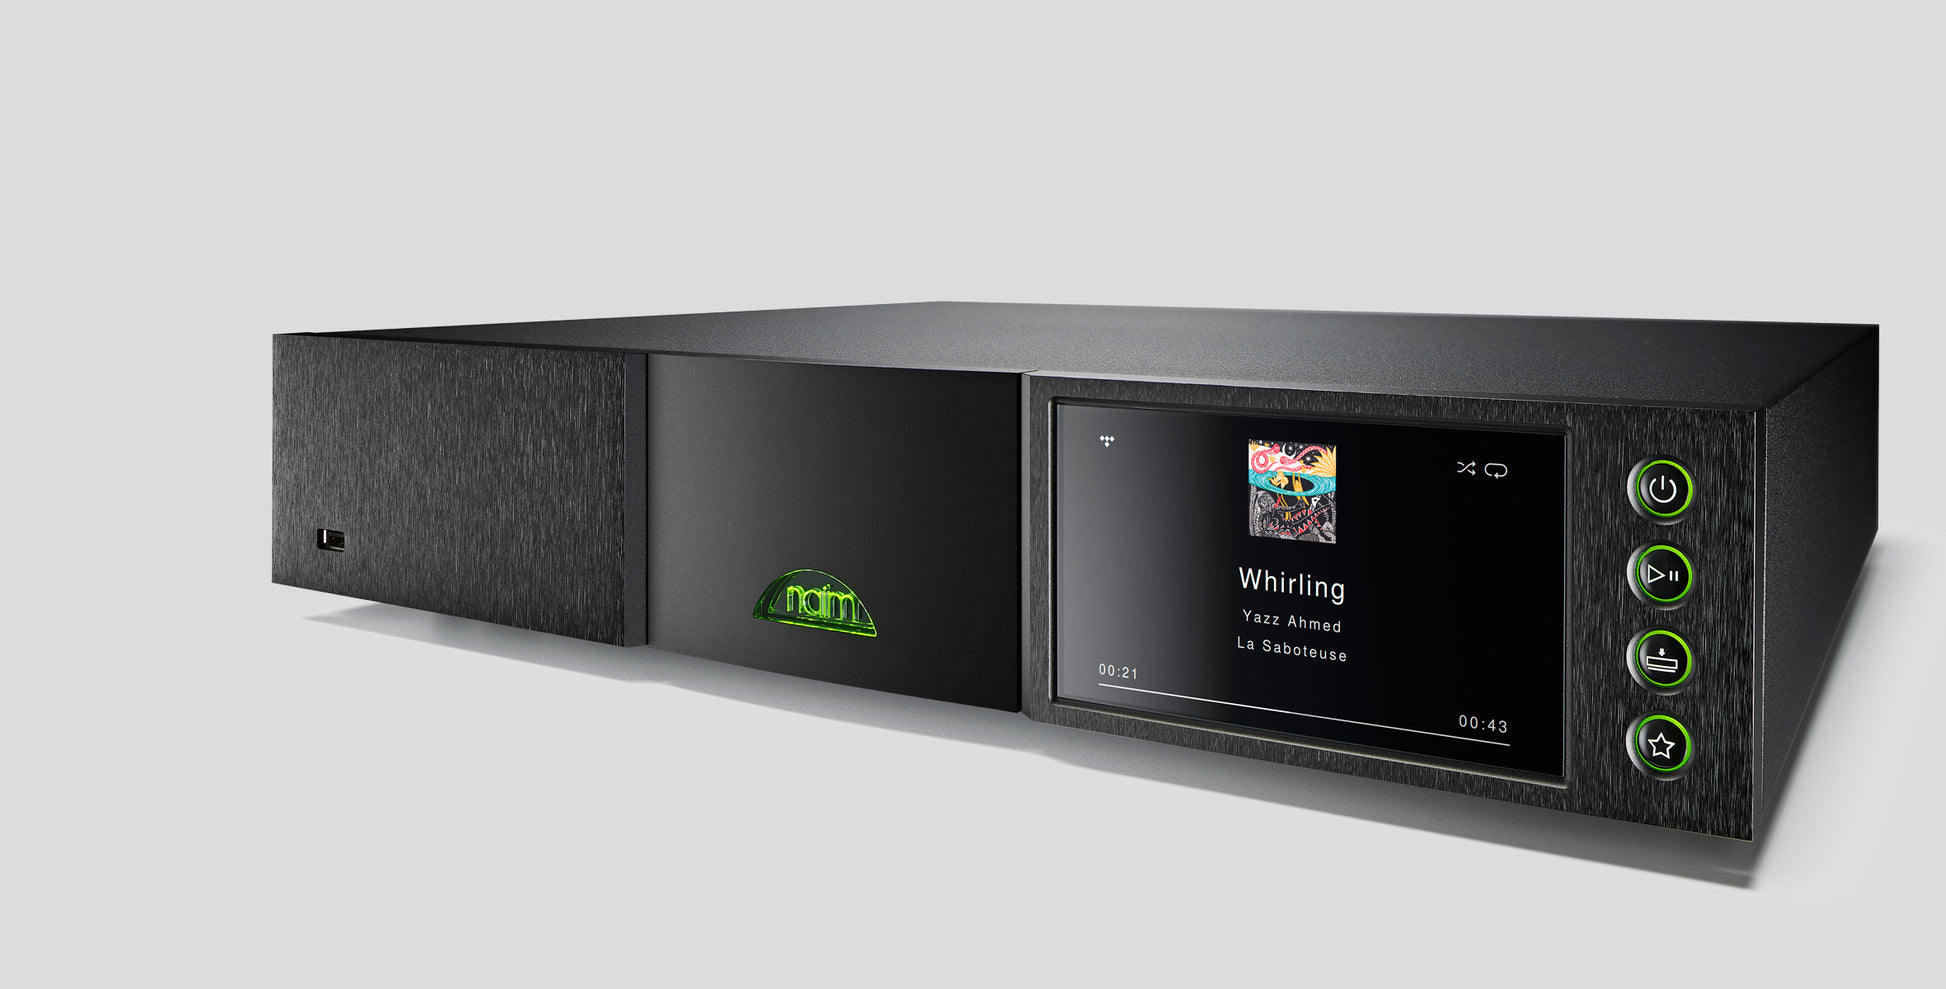 Our focus in developing the NDX 2 network player was its performance. Along with Naim’s streaming platform, we implemented an upgraded DAC and discrete analogue stages. These and other improvements over its predecessor make the NDX 2 a sonic force to be reckoned with, offering immersive and lively replay quality.